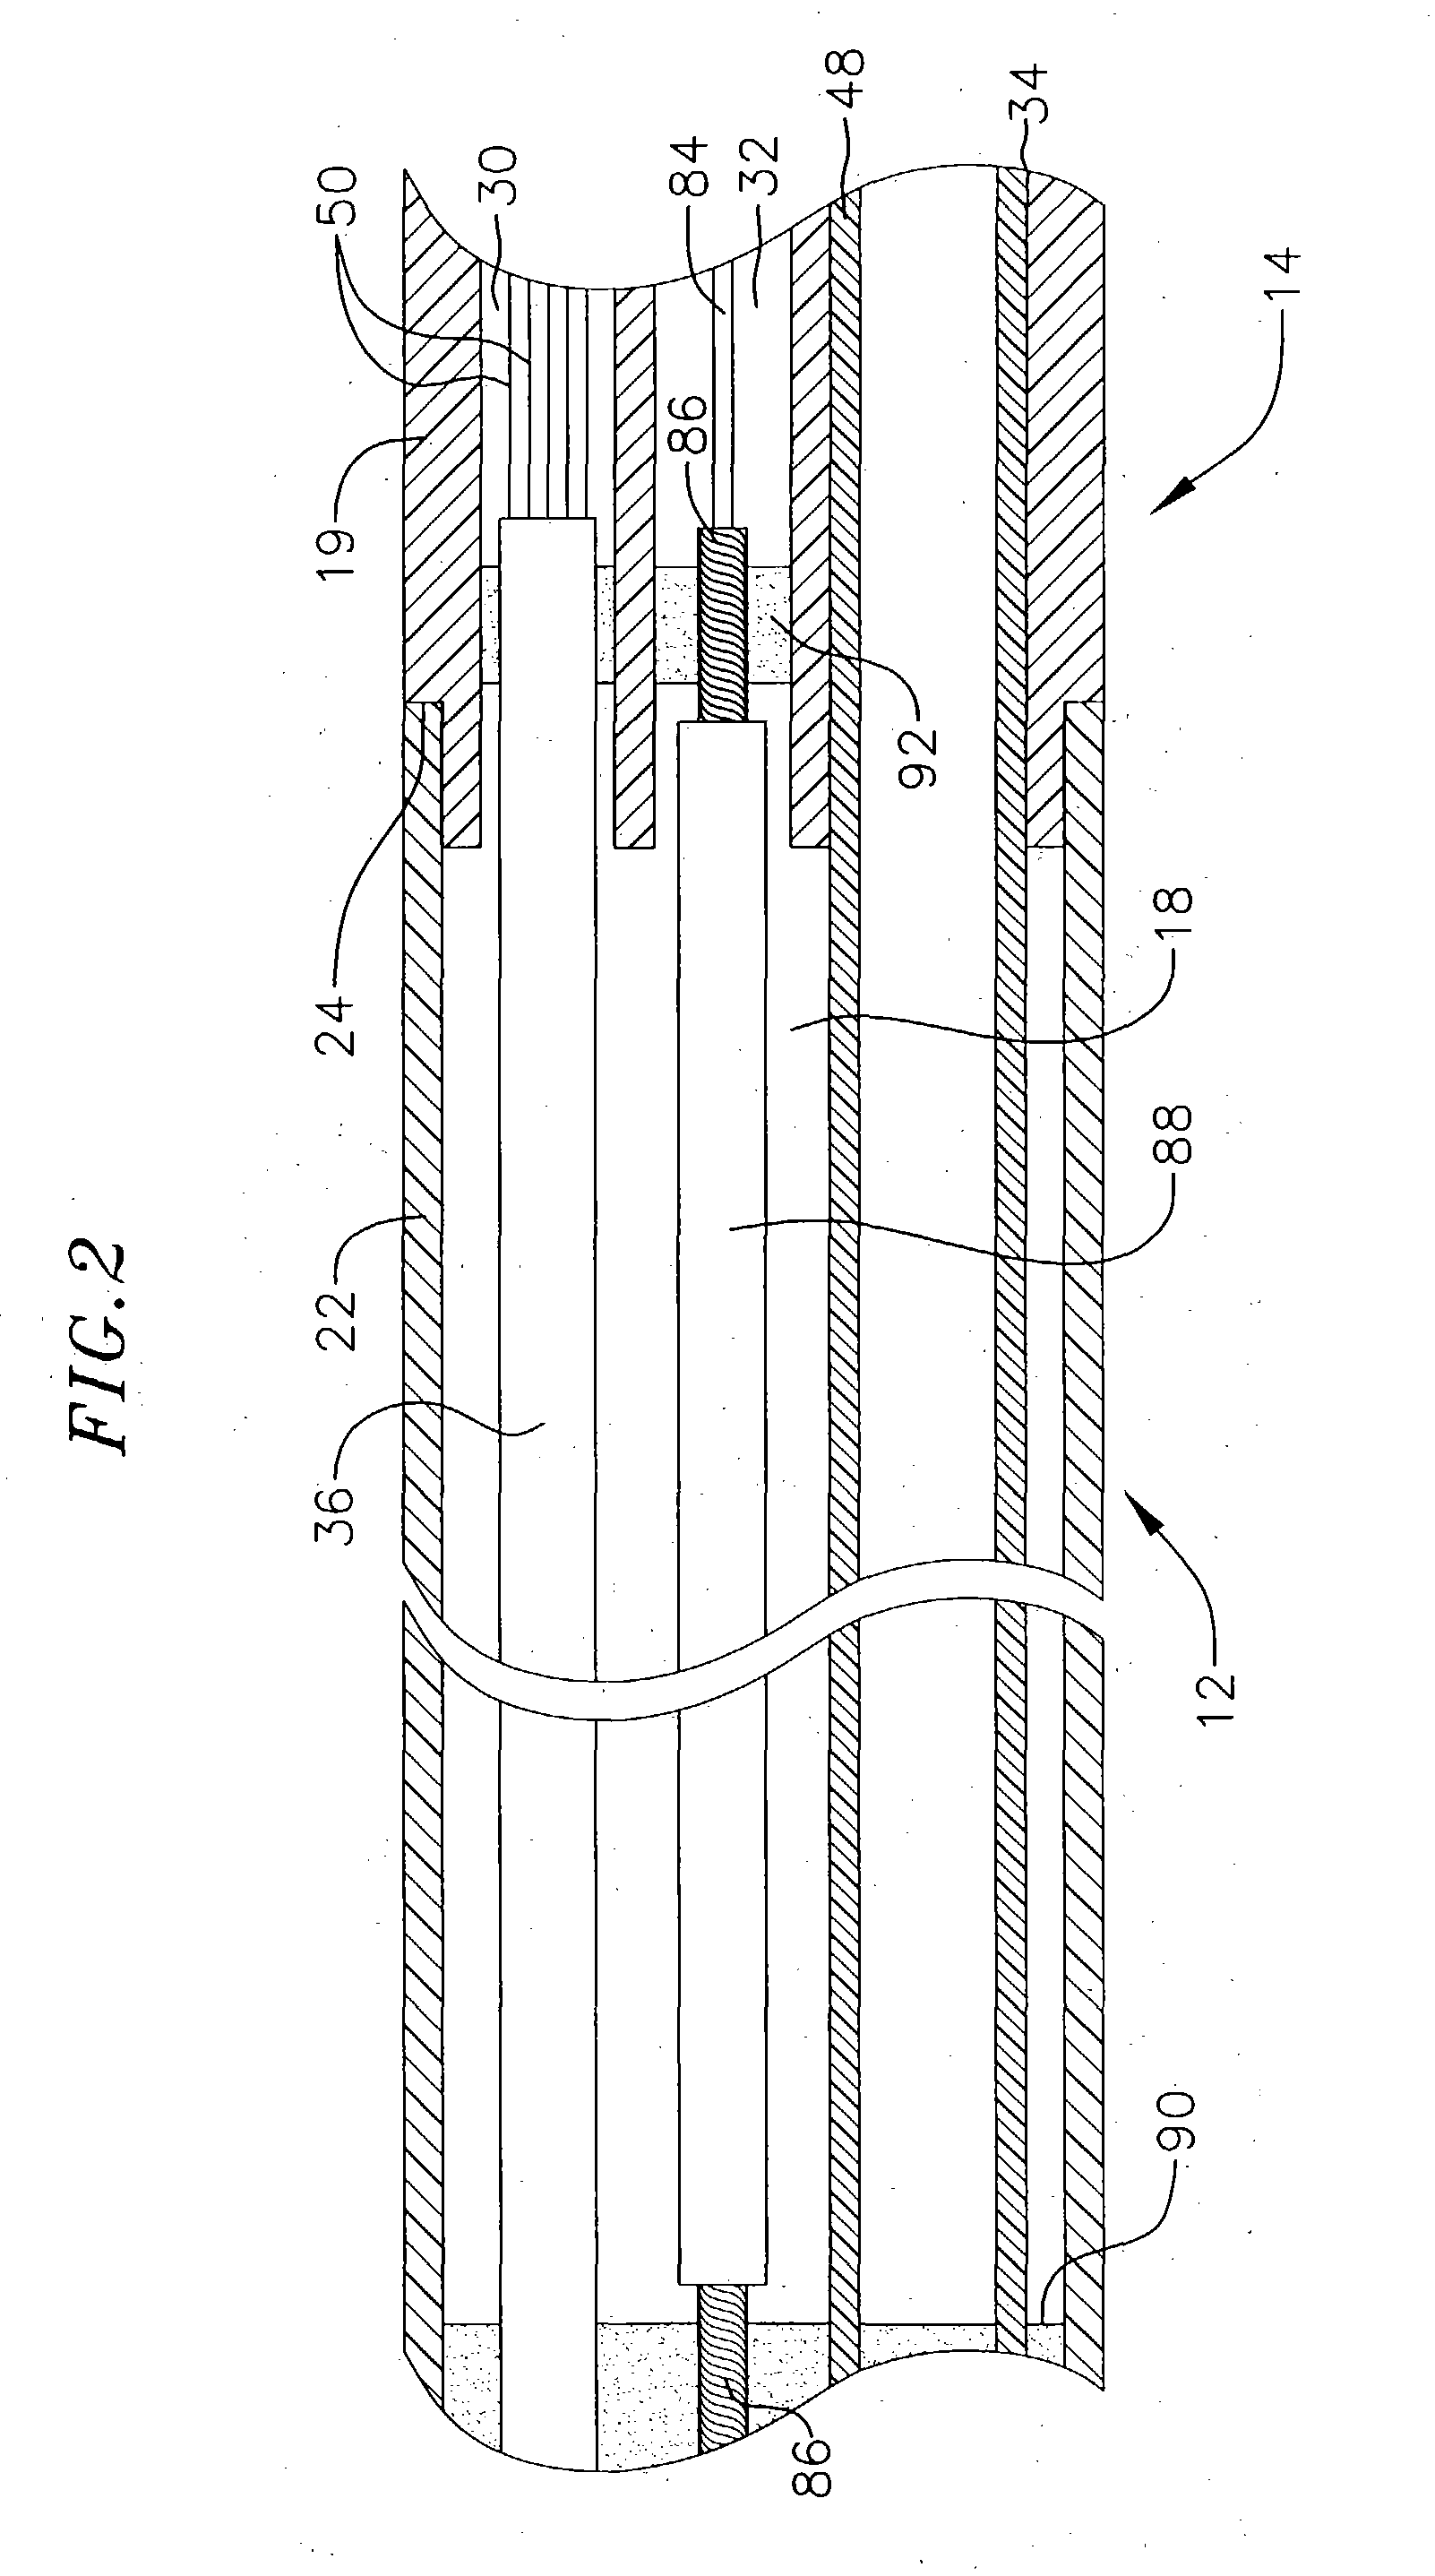 Enhanced ablation and mapping catheter and method for treating atrial fibrillation